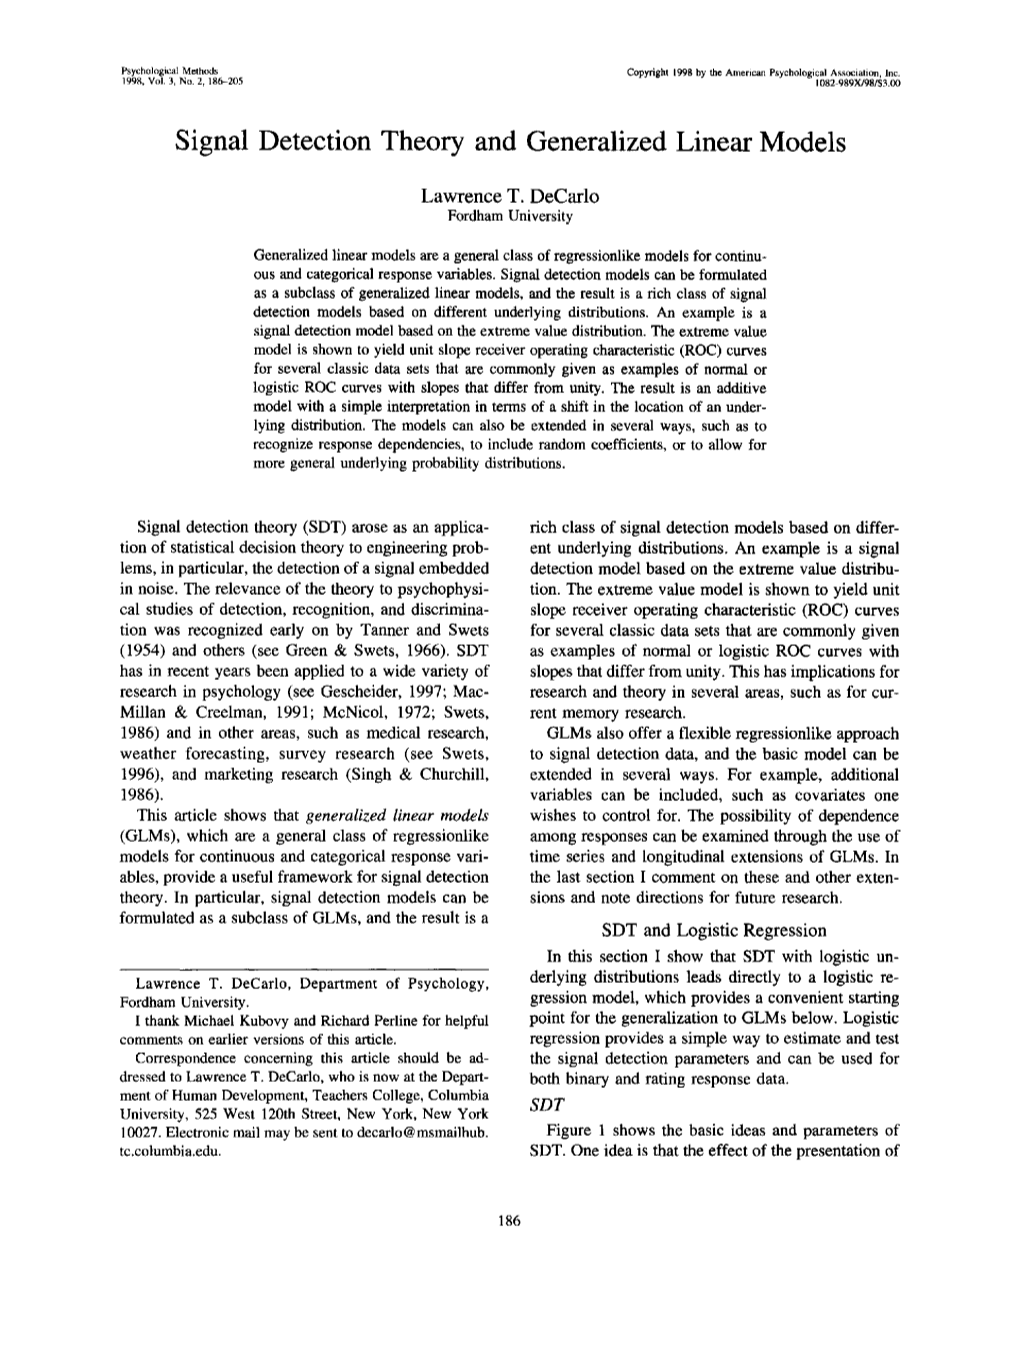 Signal Detection Theory and Generalized Linear Models